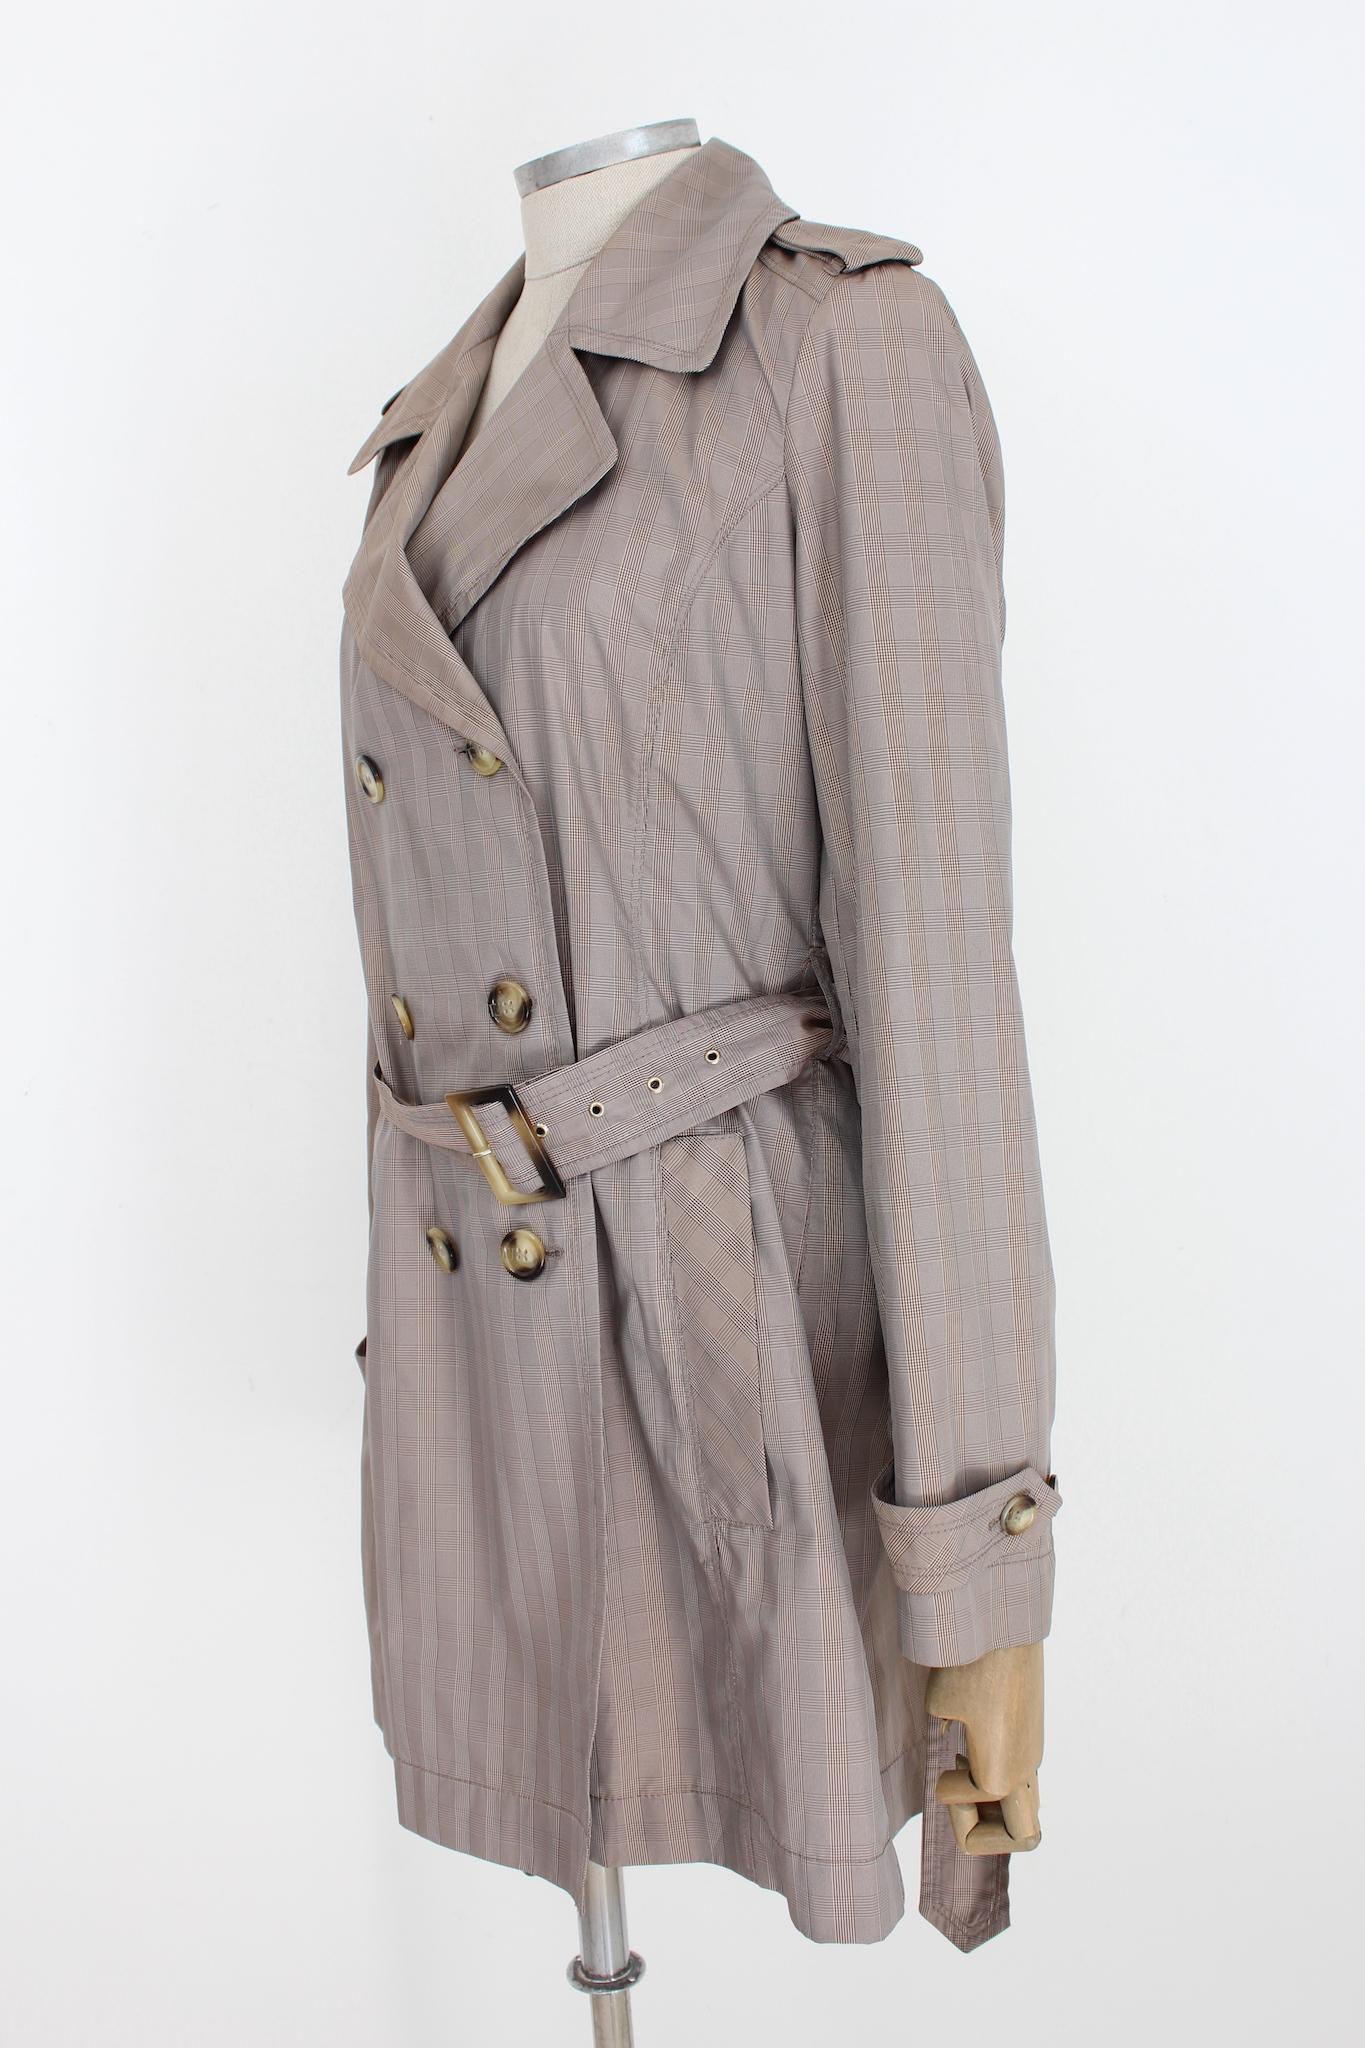 Trussardi Brown Beige Double Breasted Trench Coat In Excellent Condition For Sale In Brindisi, Bt